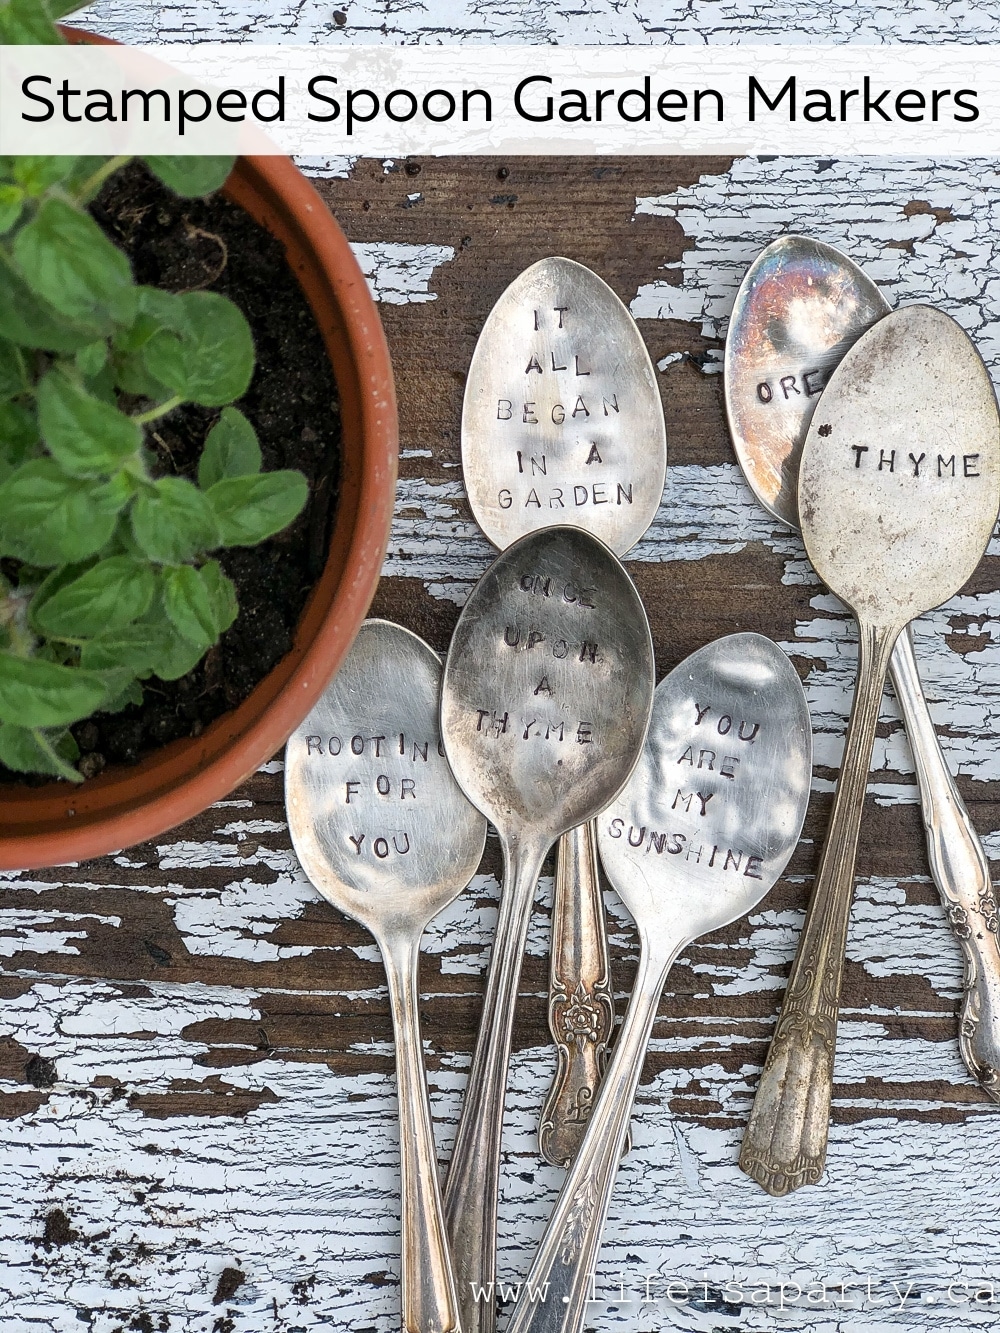 How To Make Stamped Spoon Garden Markers: use metal stamps to engrave old spoons with plant and herb names, or funny or inspirational sayings.